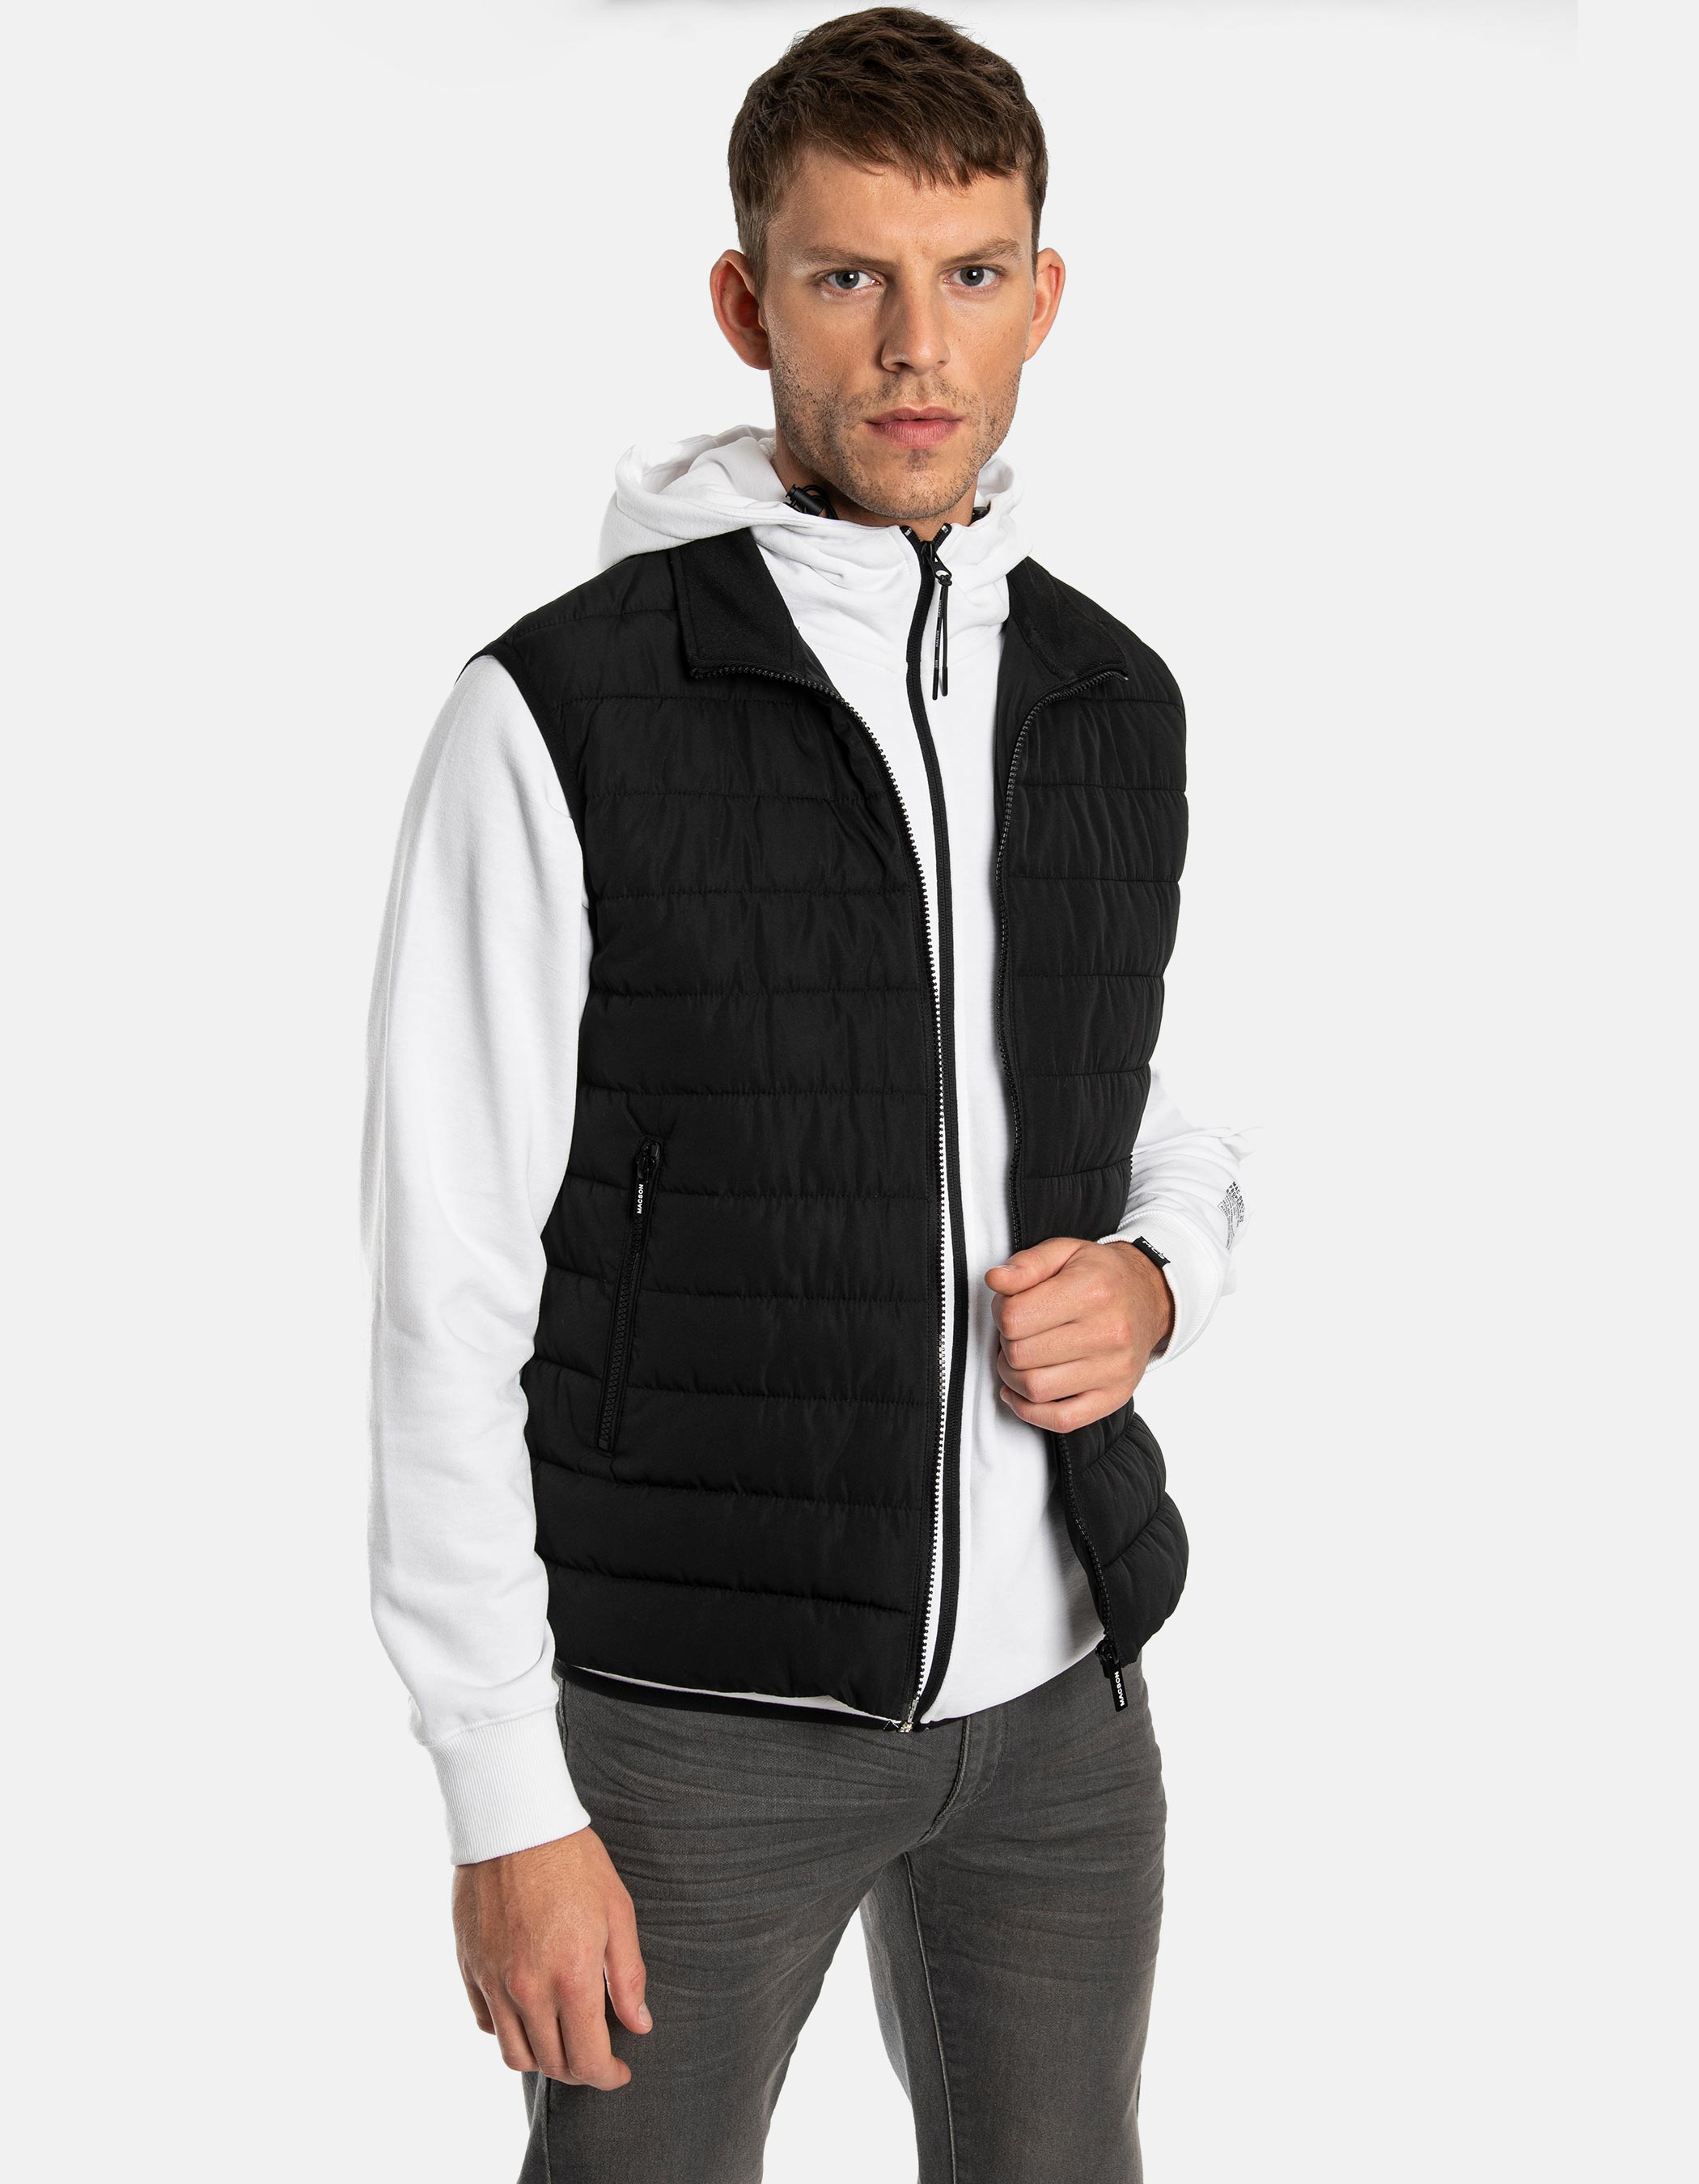 Half quilted waistcoat 1